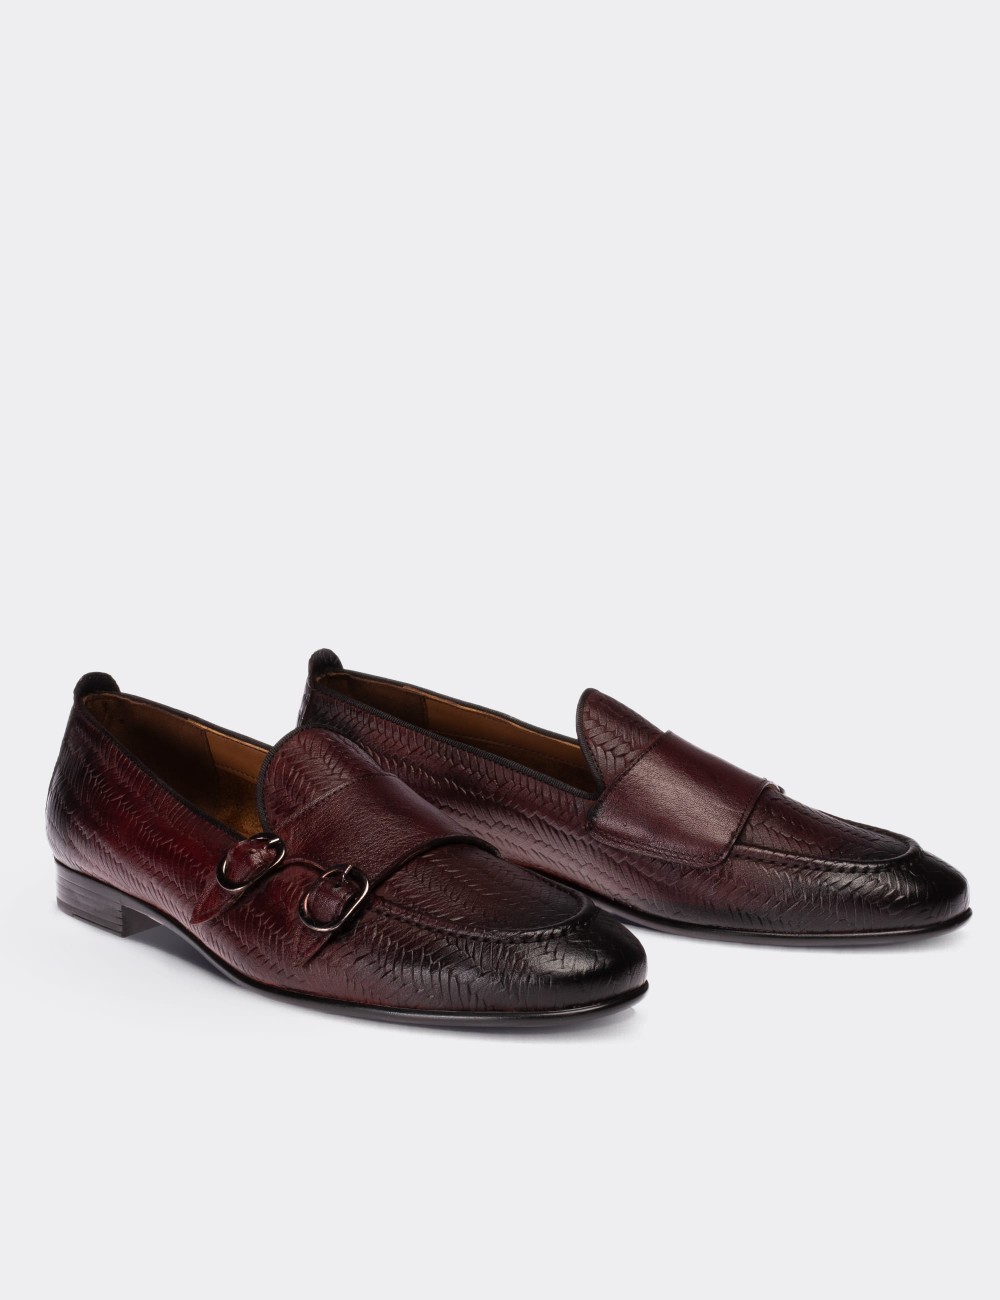 Burgundy Suede Leather Double Strap Loafers - 01704MBRDC05